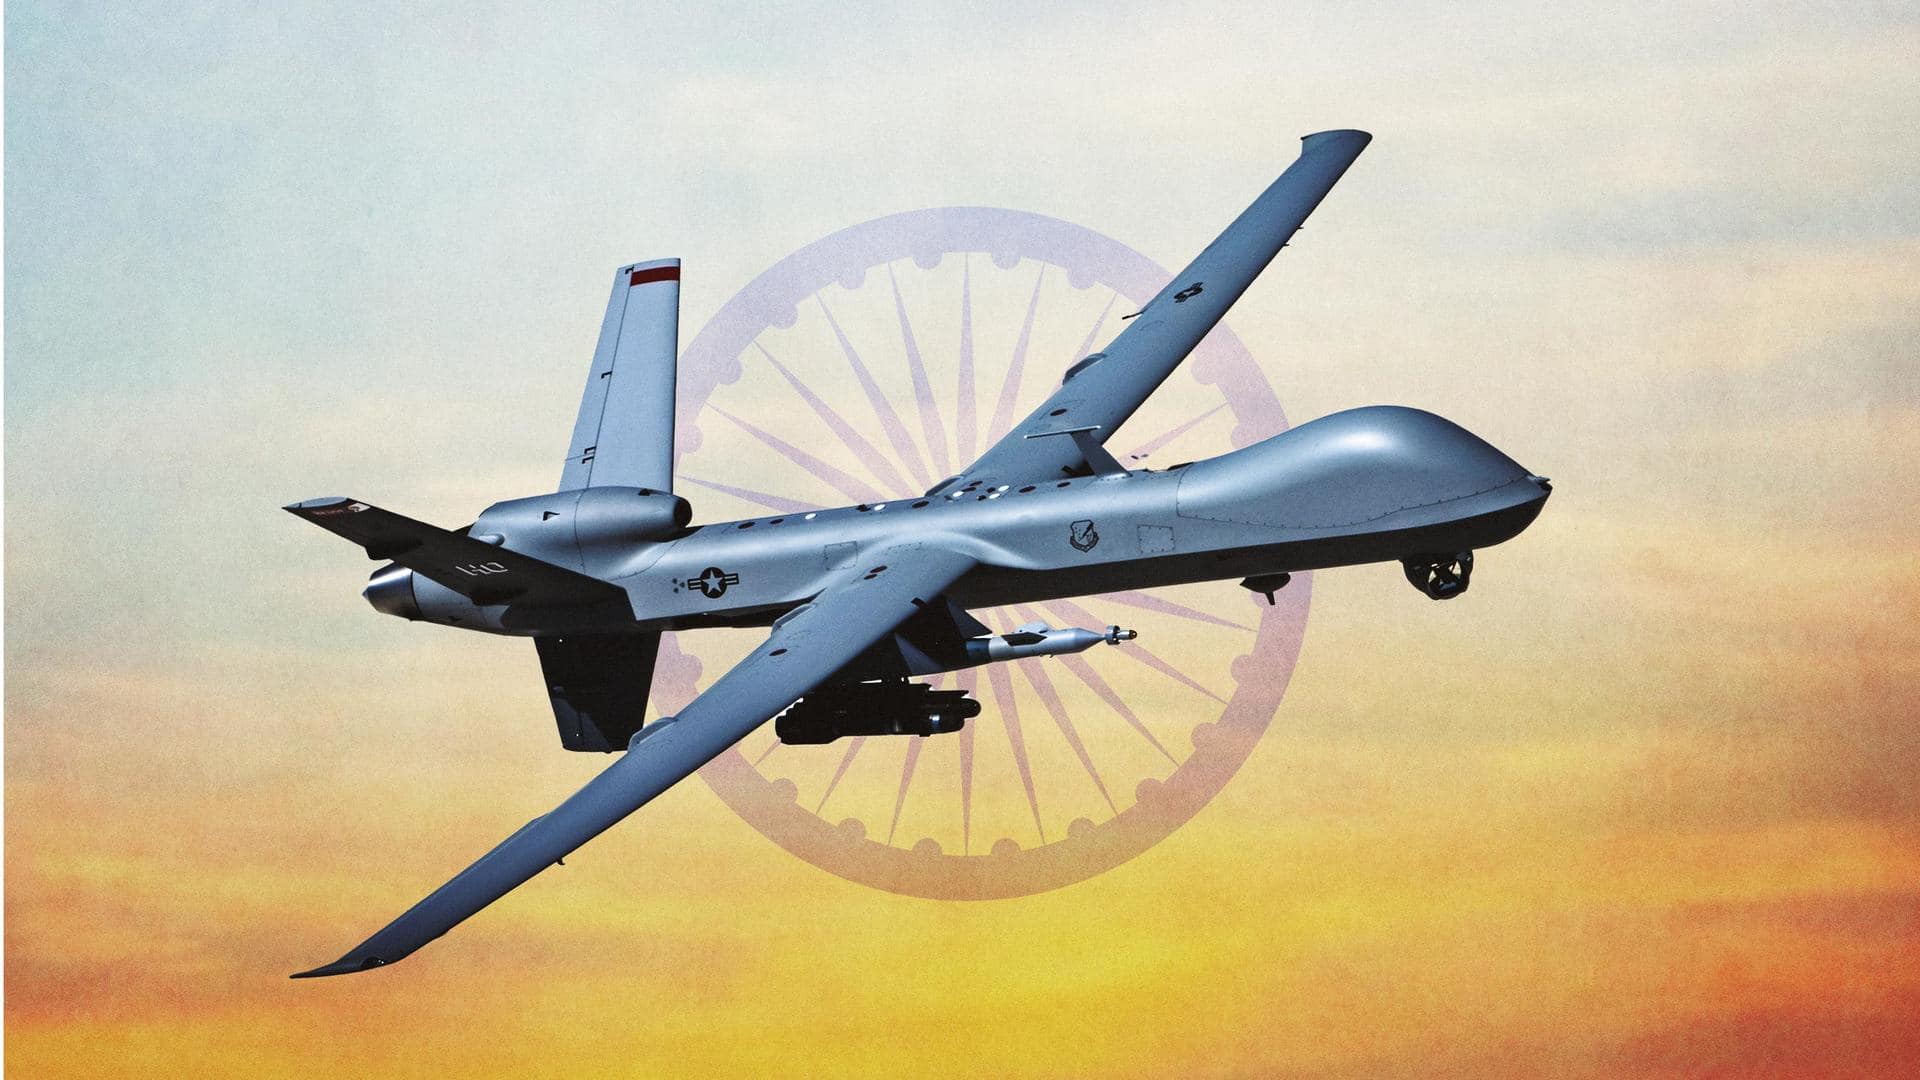 India to acquire over 30 MQ-9B predator drones from US